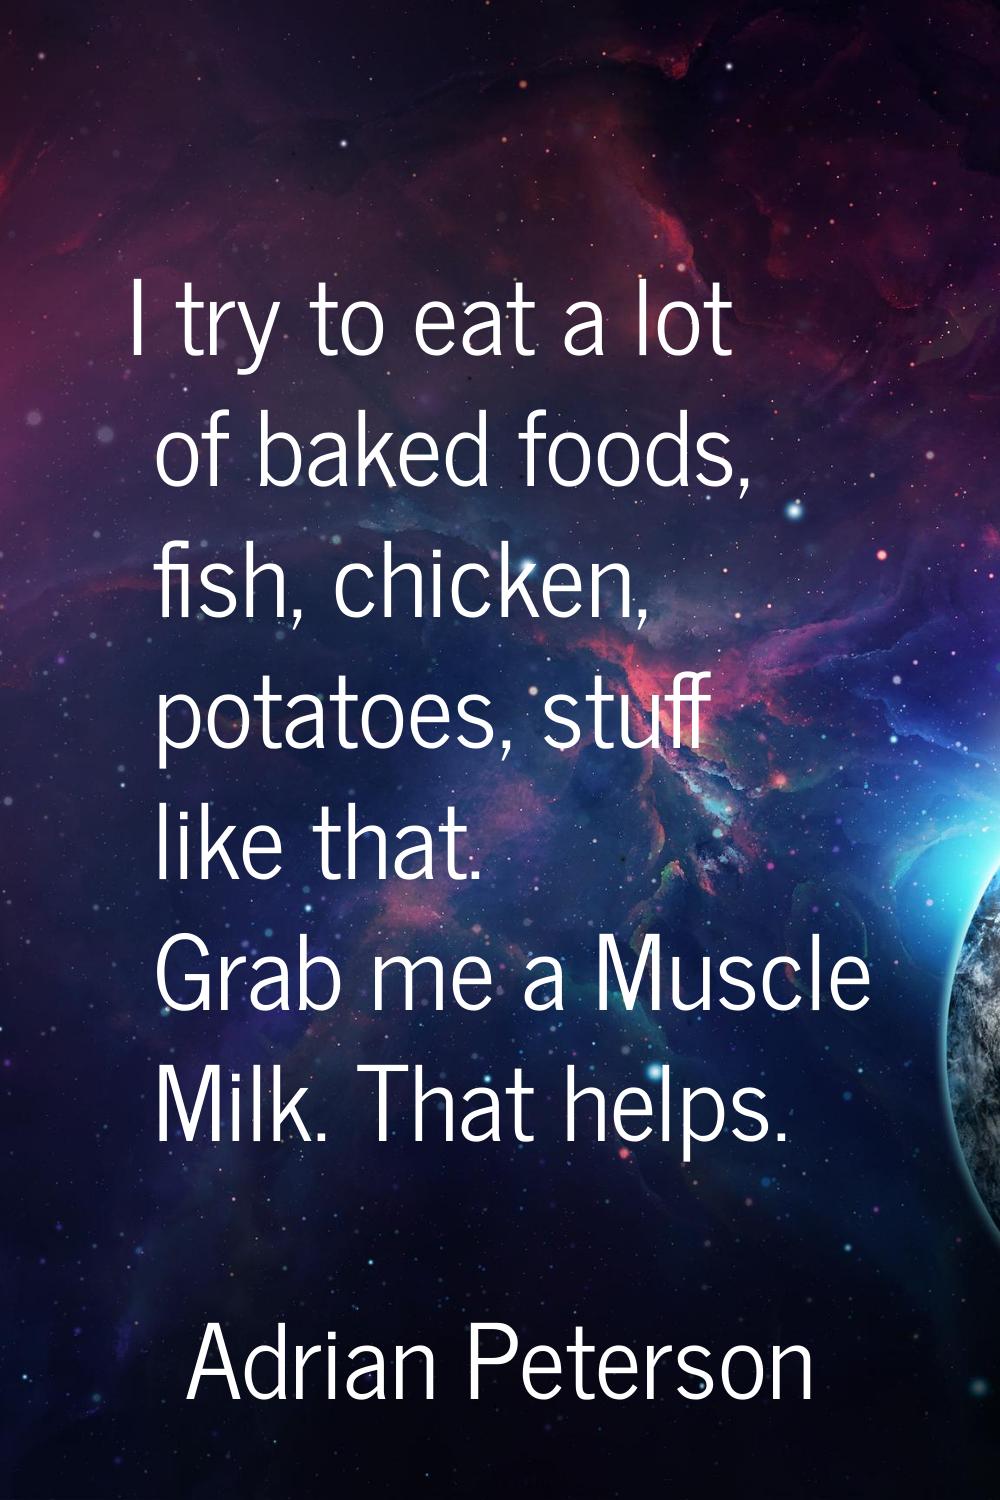 I try to eat a lot of baked foods, fish, chicken, potatoes, stuff like that. Grab me a Muscle Milk.